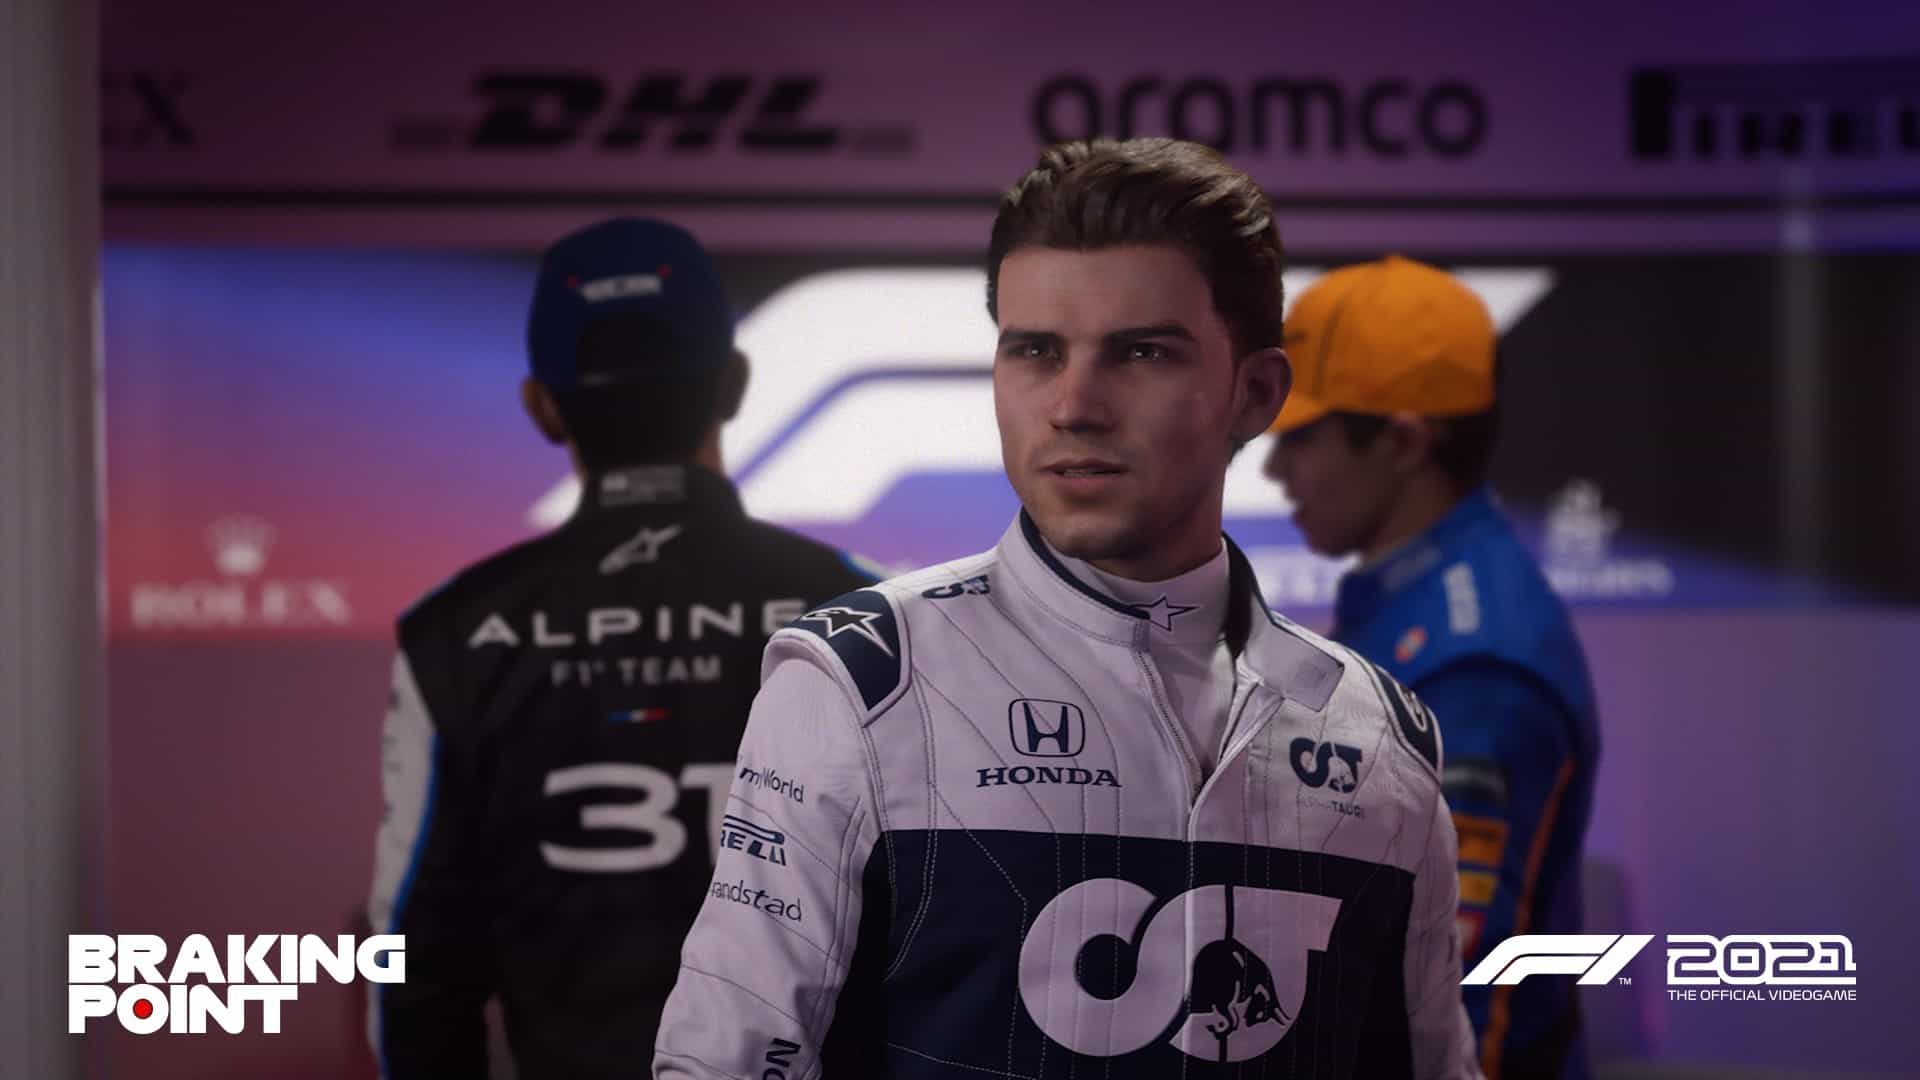 Here are the five fictional characters in F1 2021 game’s Braking Point